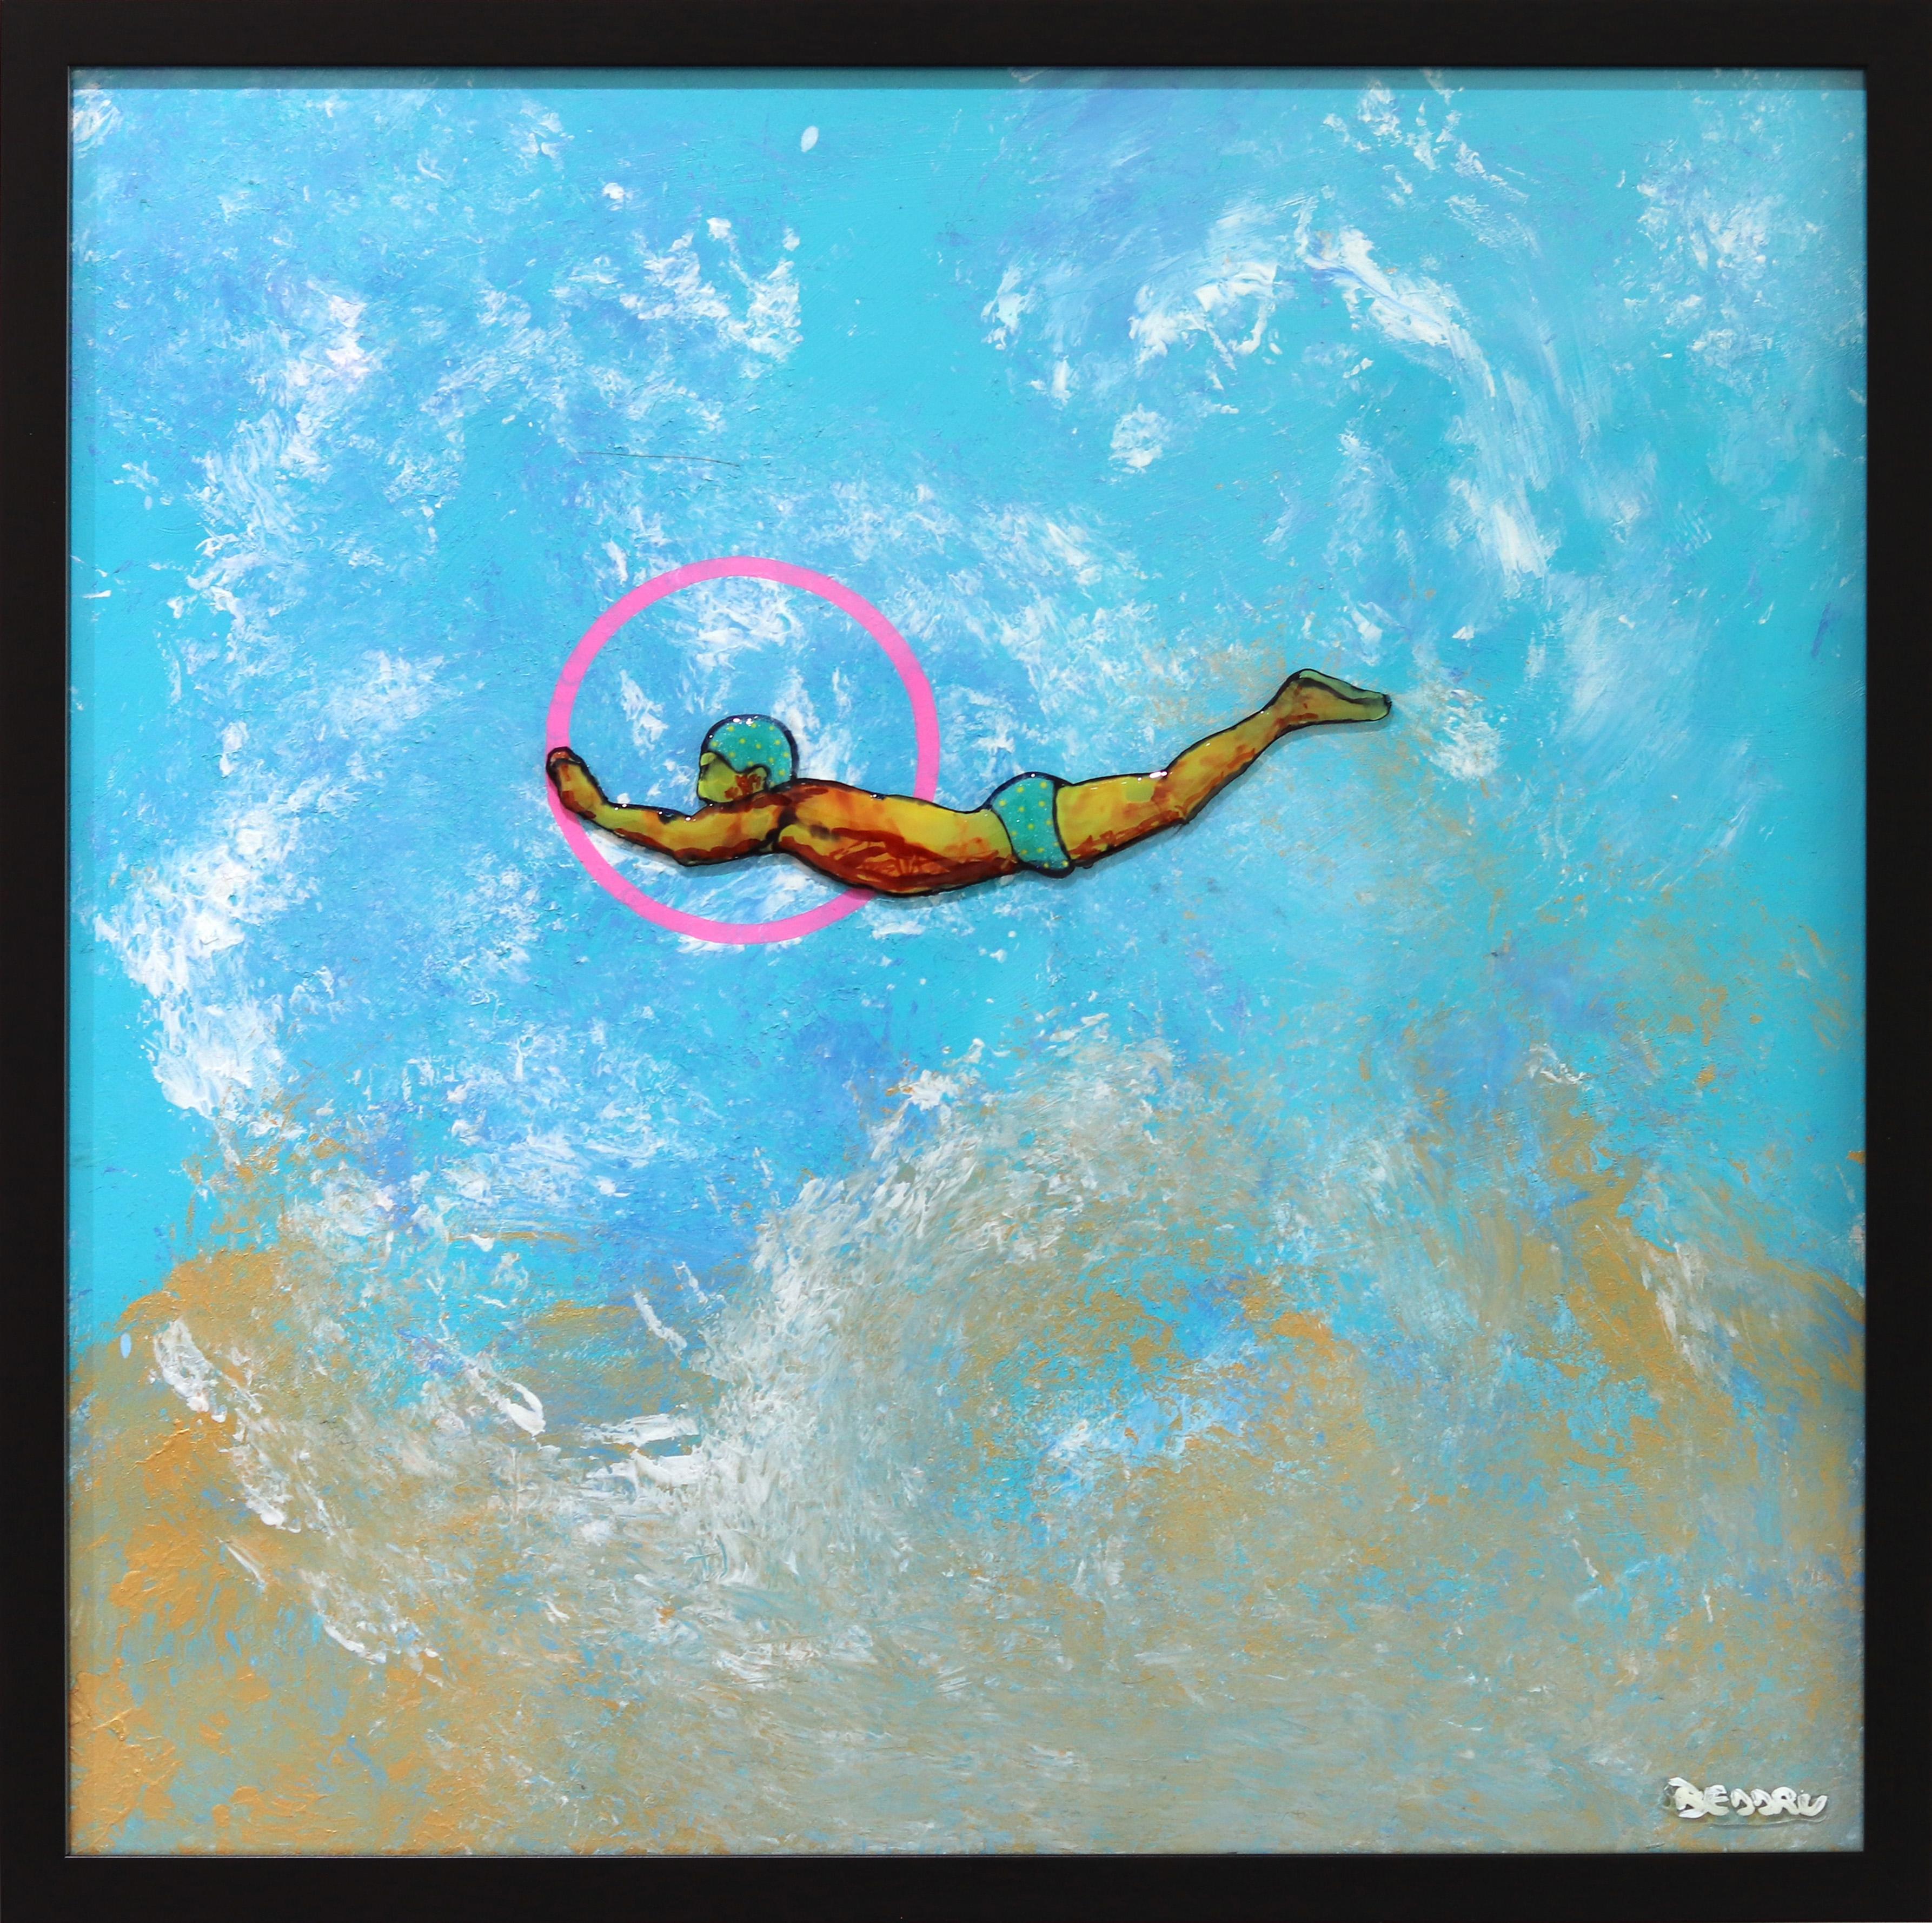 The Young Diver - Ocean Inspired Painting